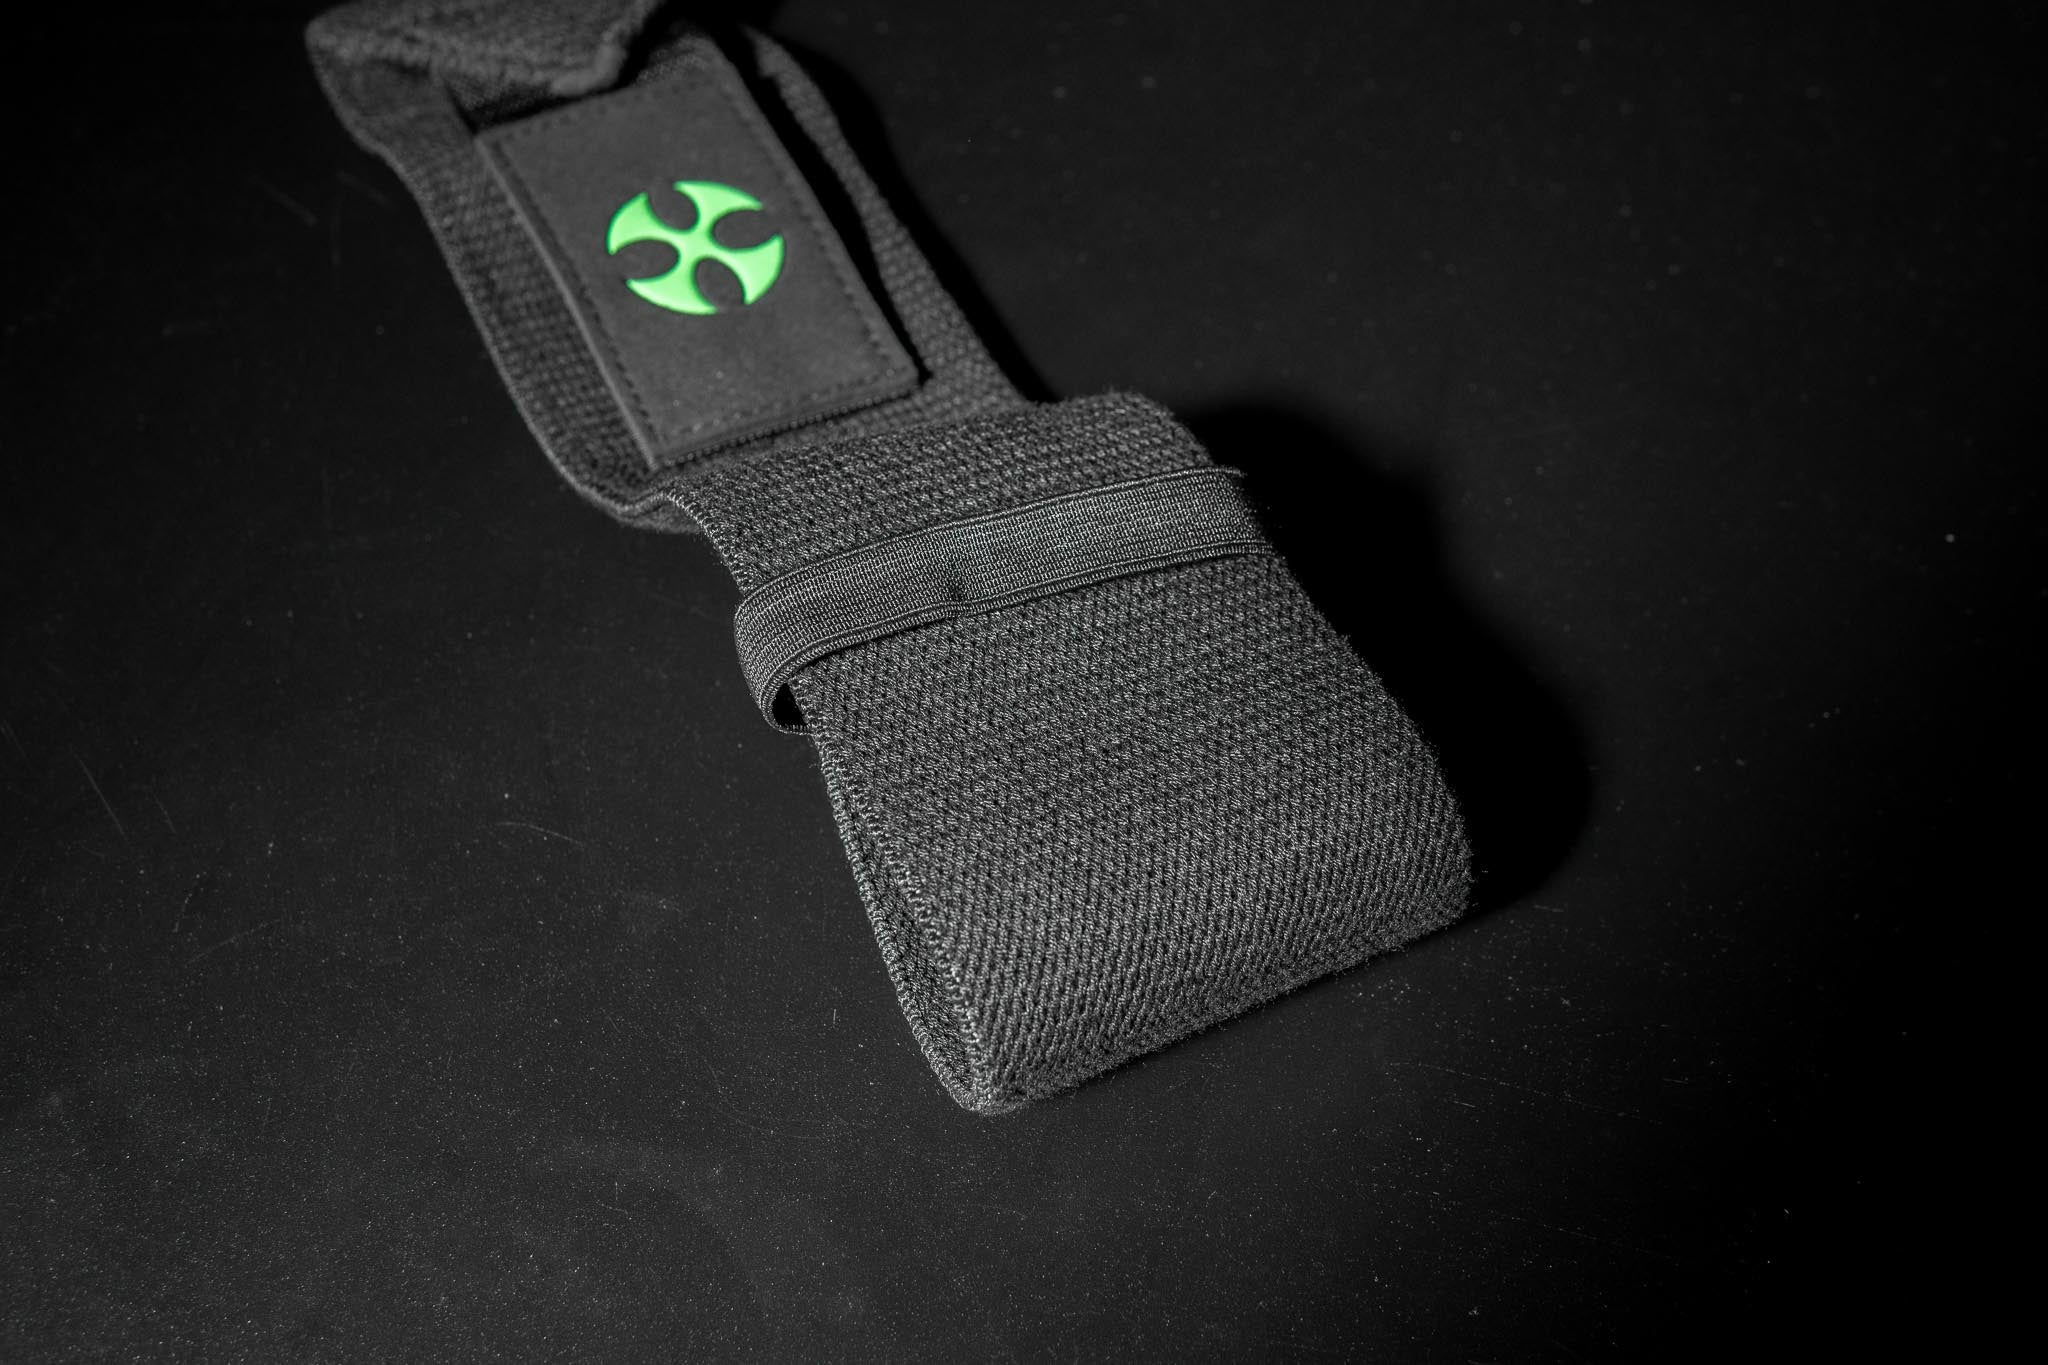 Reyllen X1 Wrist wraps bands for weightlifting and crossfit feature 2